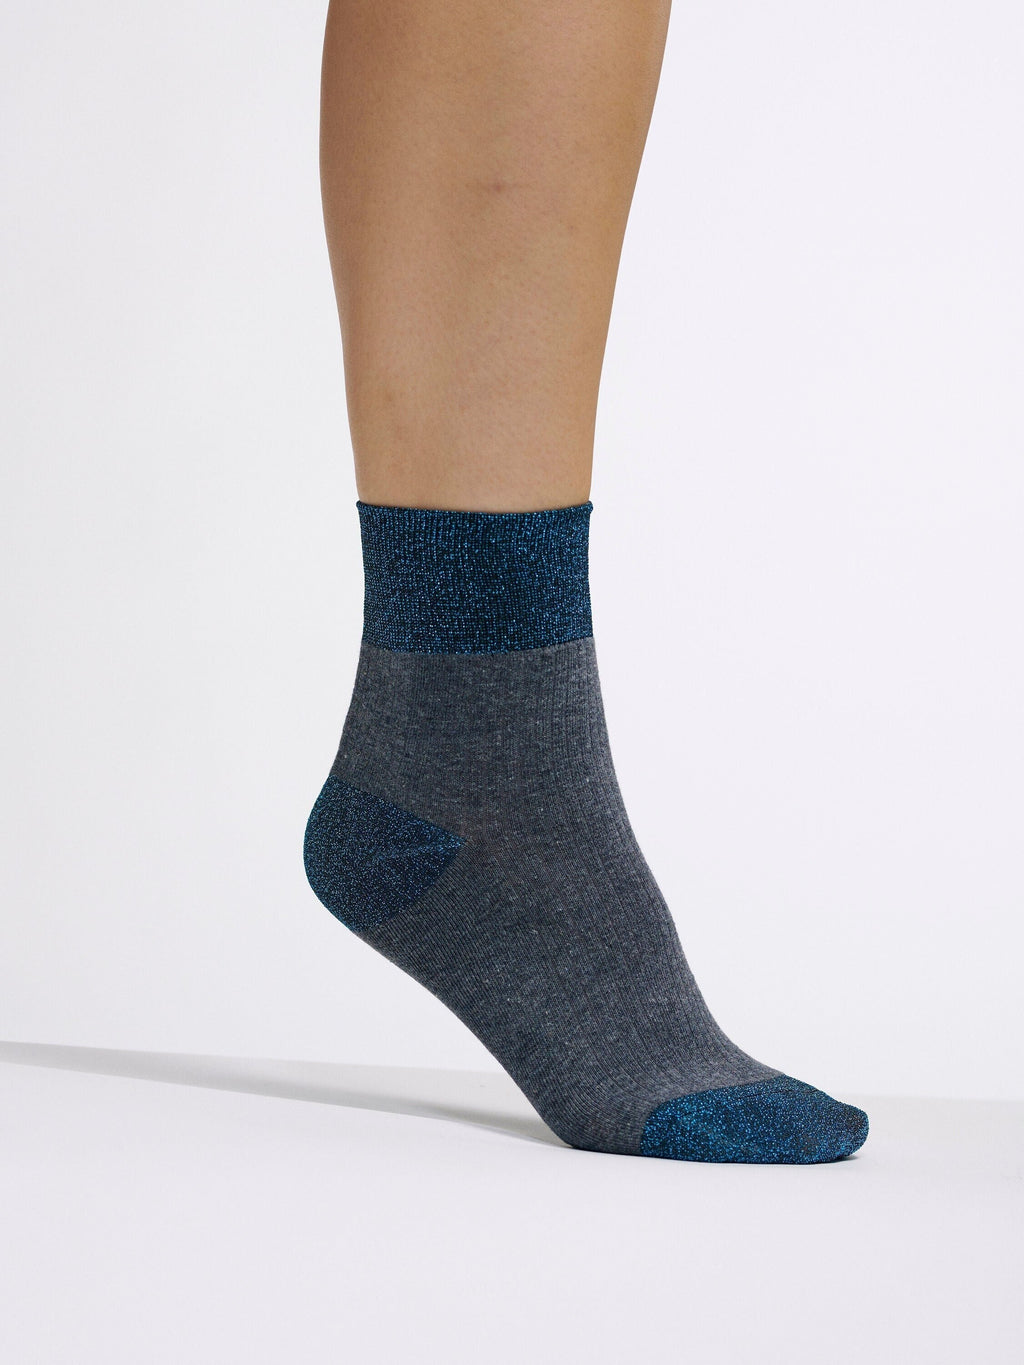 The Sensible Sparkle Socks | Warm and Wearable but a Little Fab | Glittery Lurex Threads in Teal with Contrasting Heather Gray | Goose Taffy